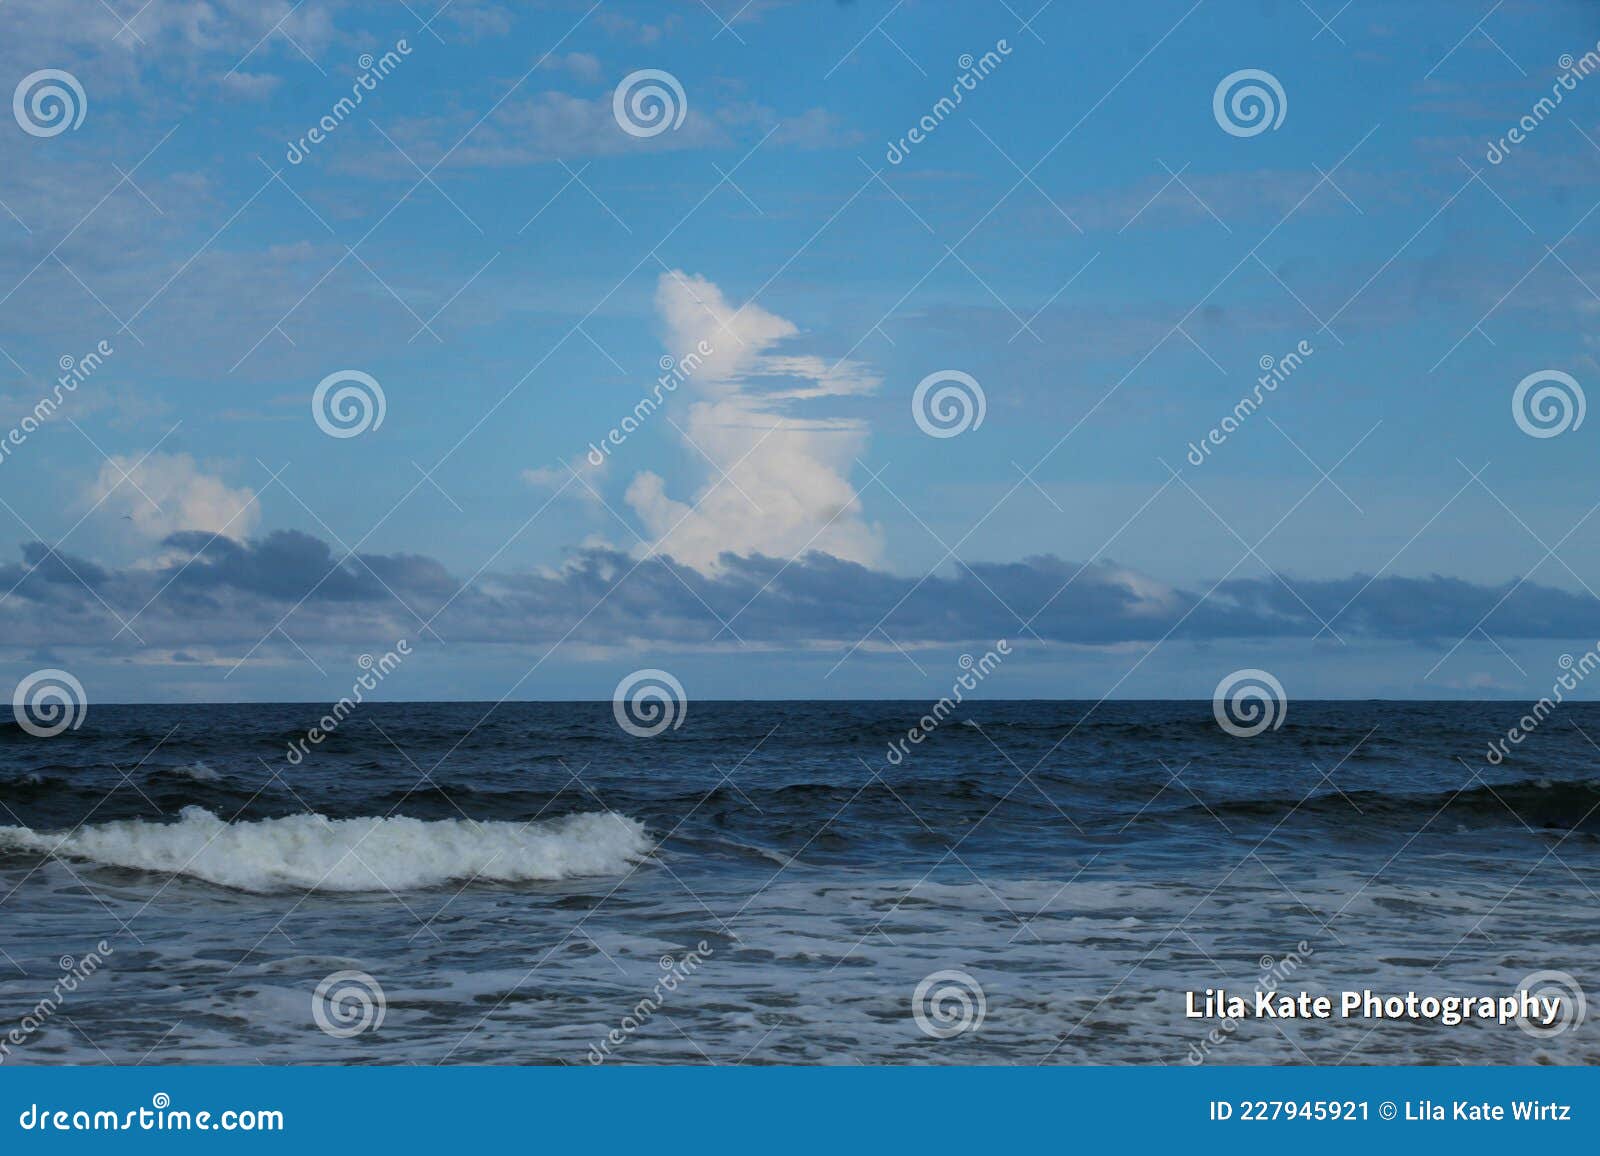 blue skies over ocean, outer banks duck, north carolina